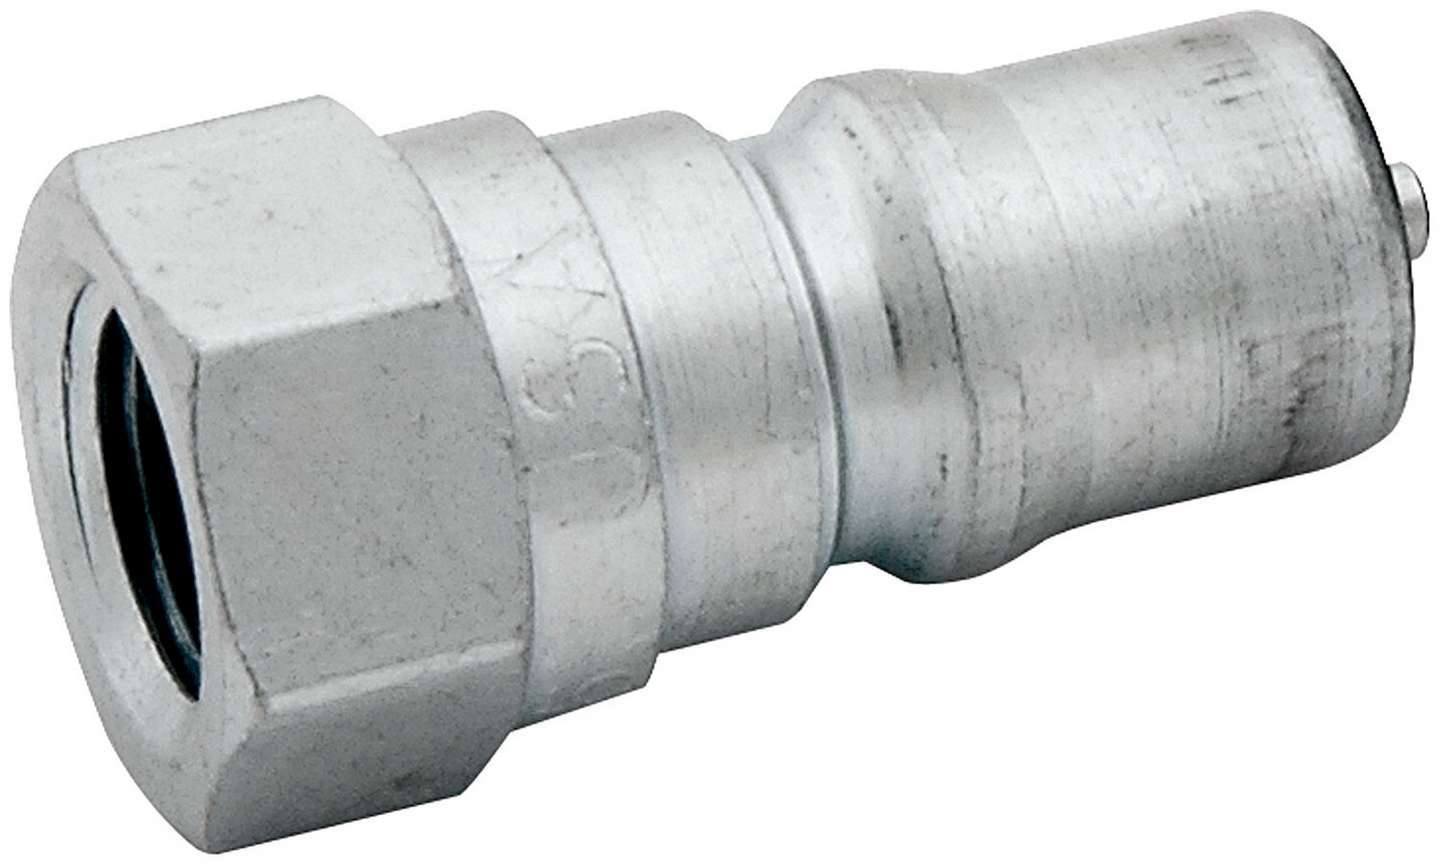 Allstar Performance 50216 - Fitting, Quick Disconnect, Male Half to 1/8 in NPT Female, Steel, Zinc Plated, Each